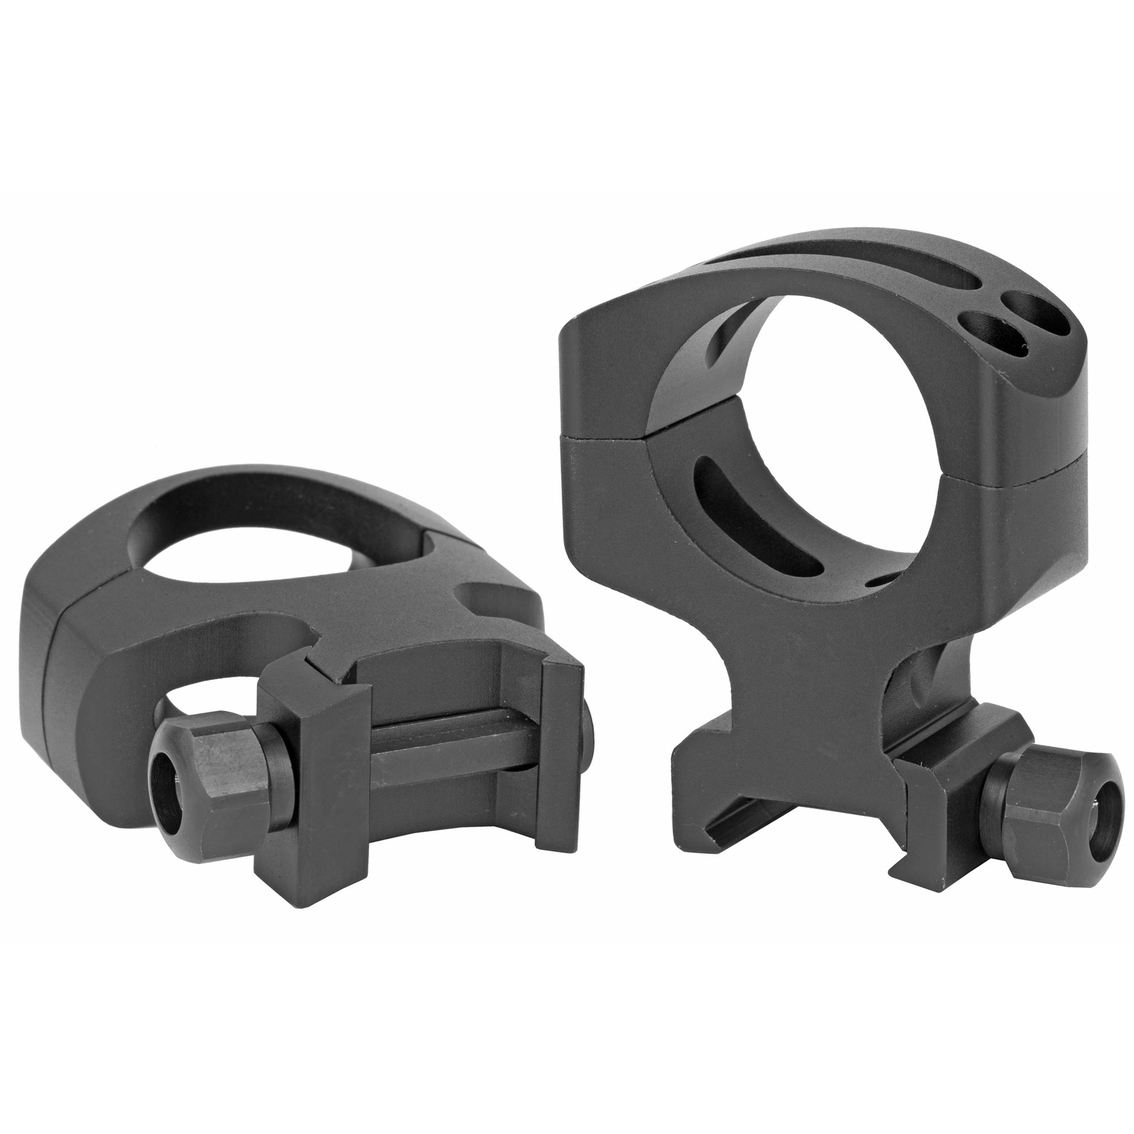 Warne Scope Mounts Tactical Rings, fits AR-15 30mm Ultra High, Matte - Image 2 of 2